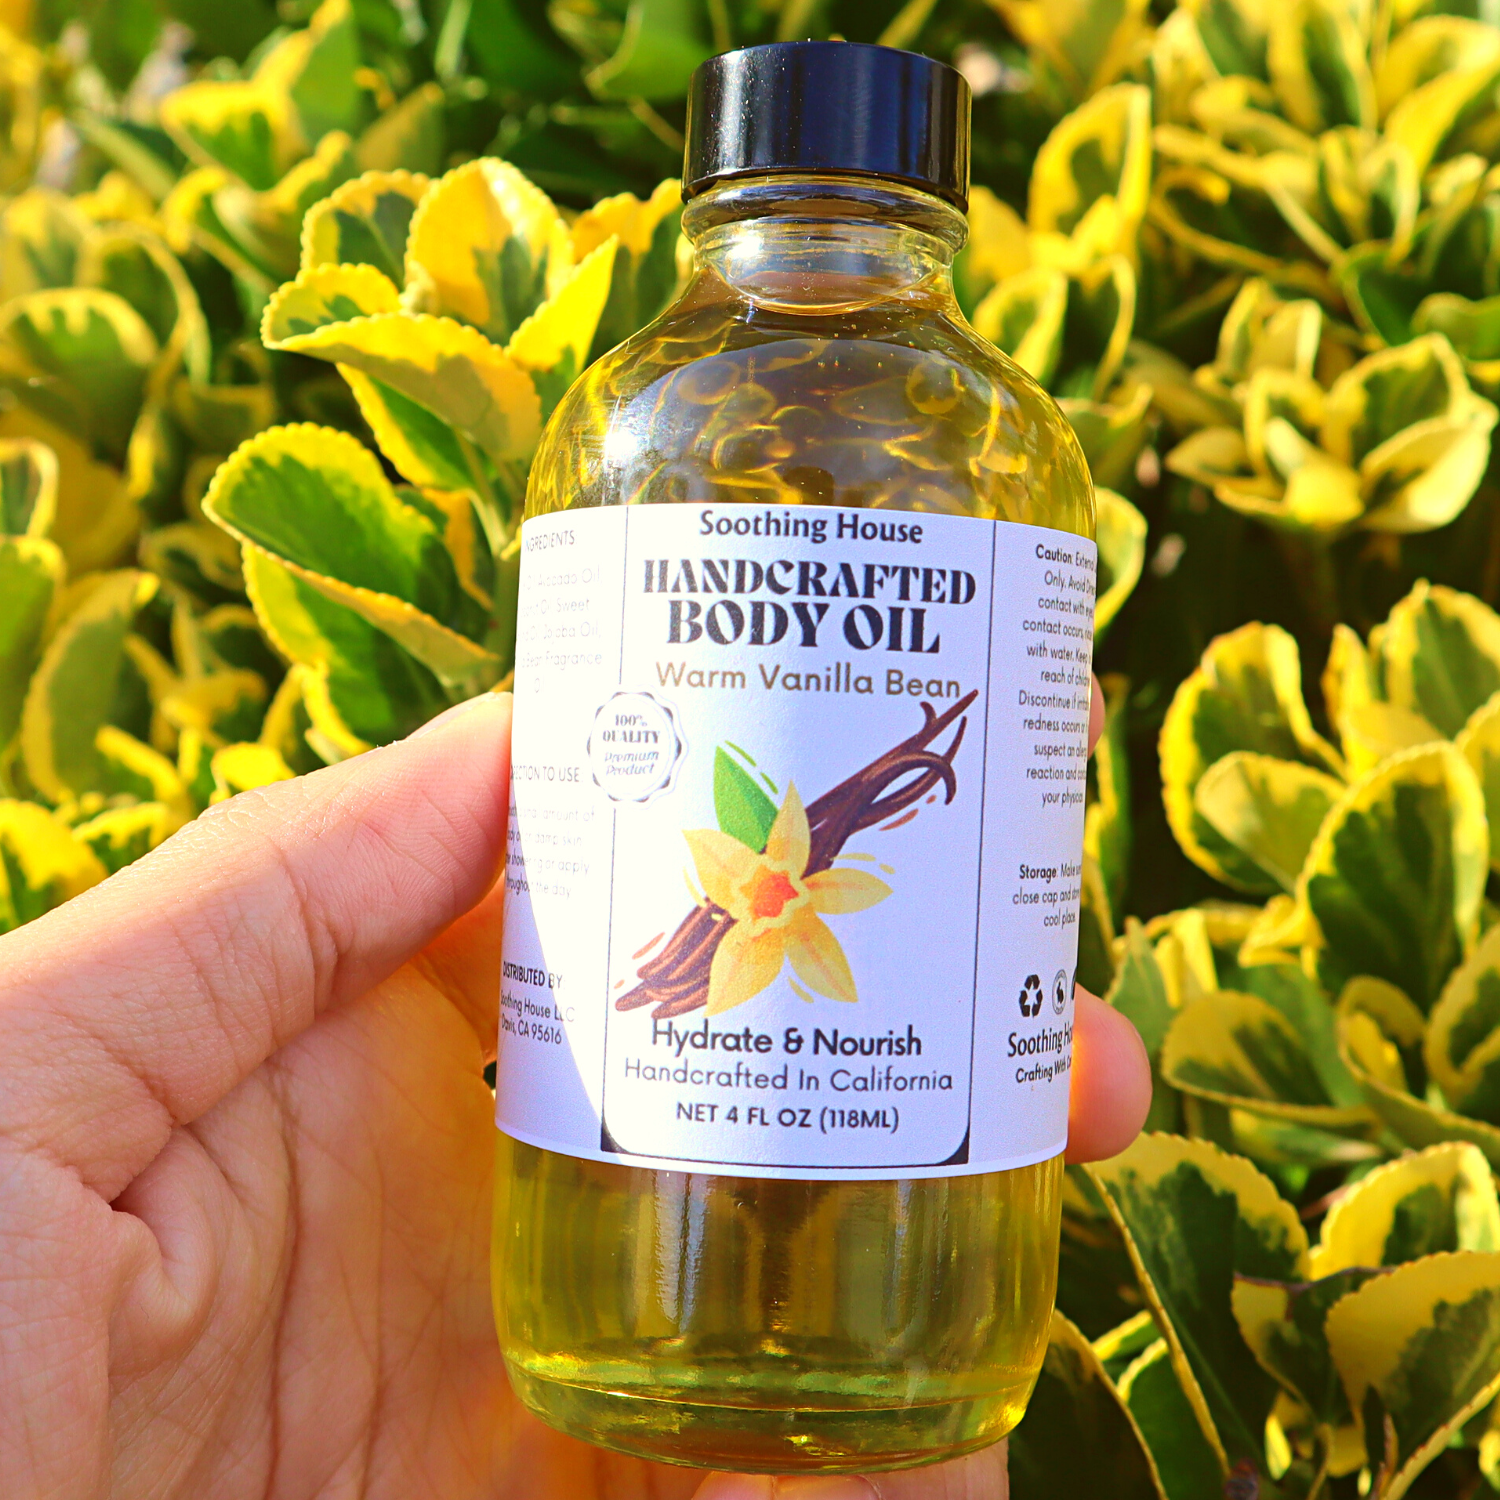 Handcrafted Vanilla Bean Multi-Use Body Oil – Soothing House